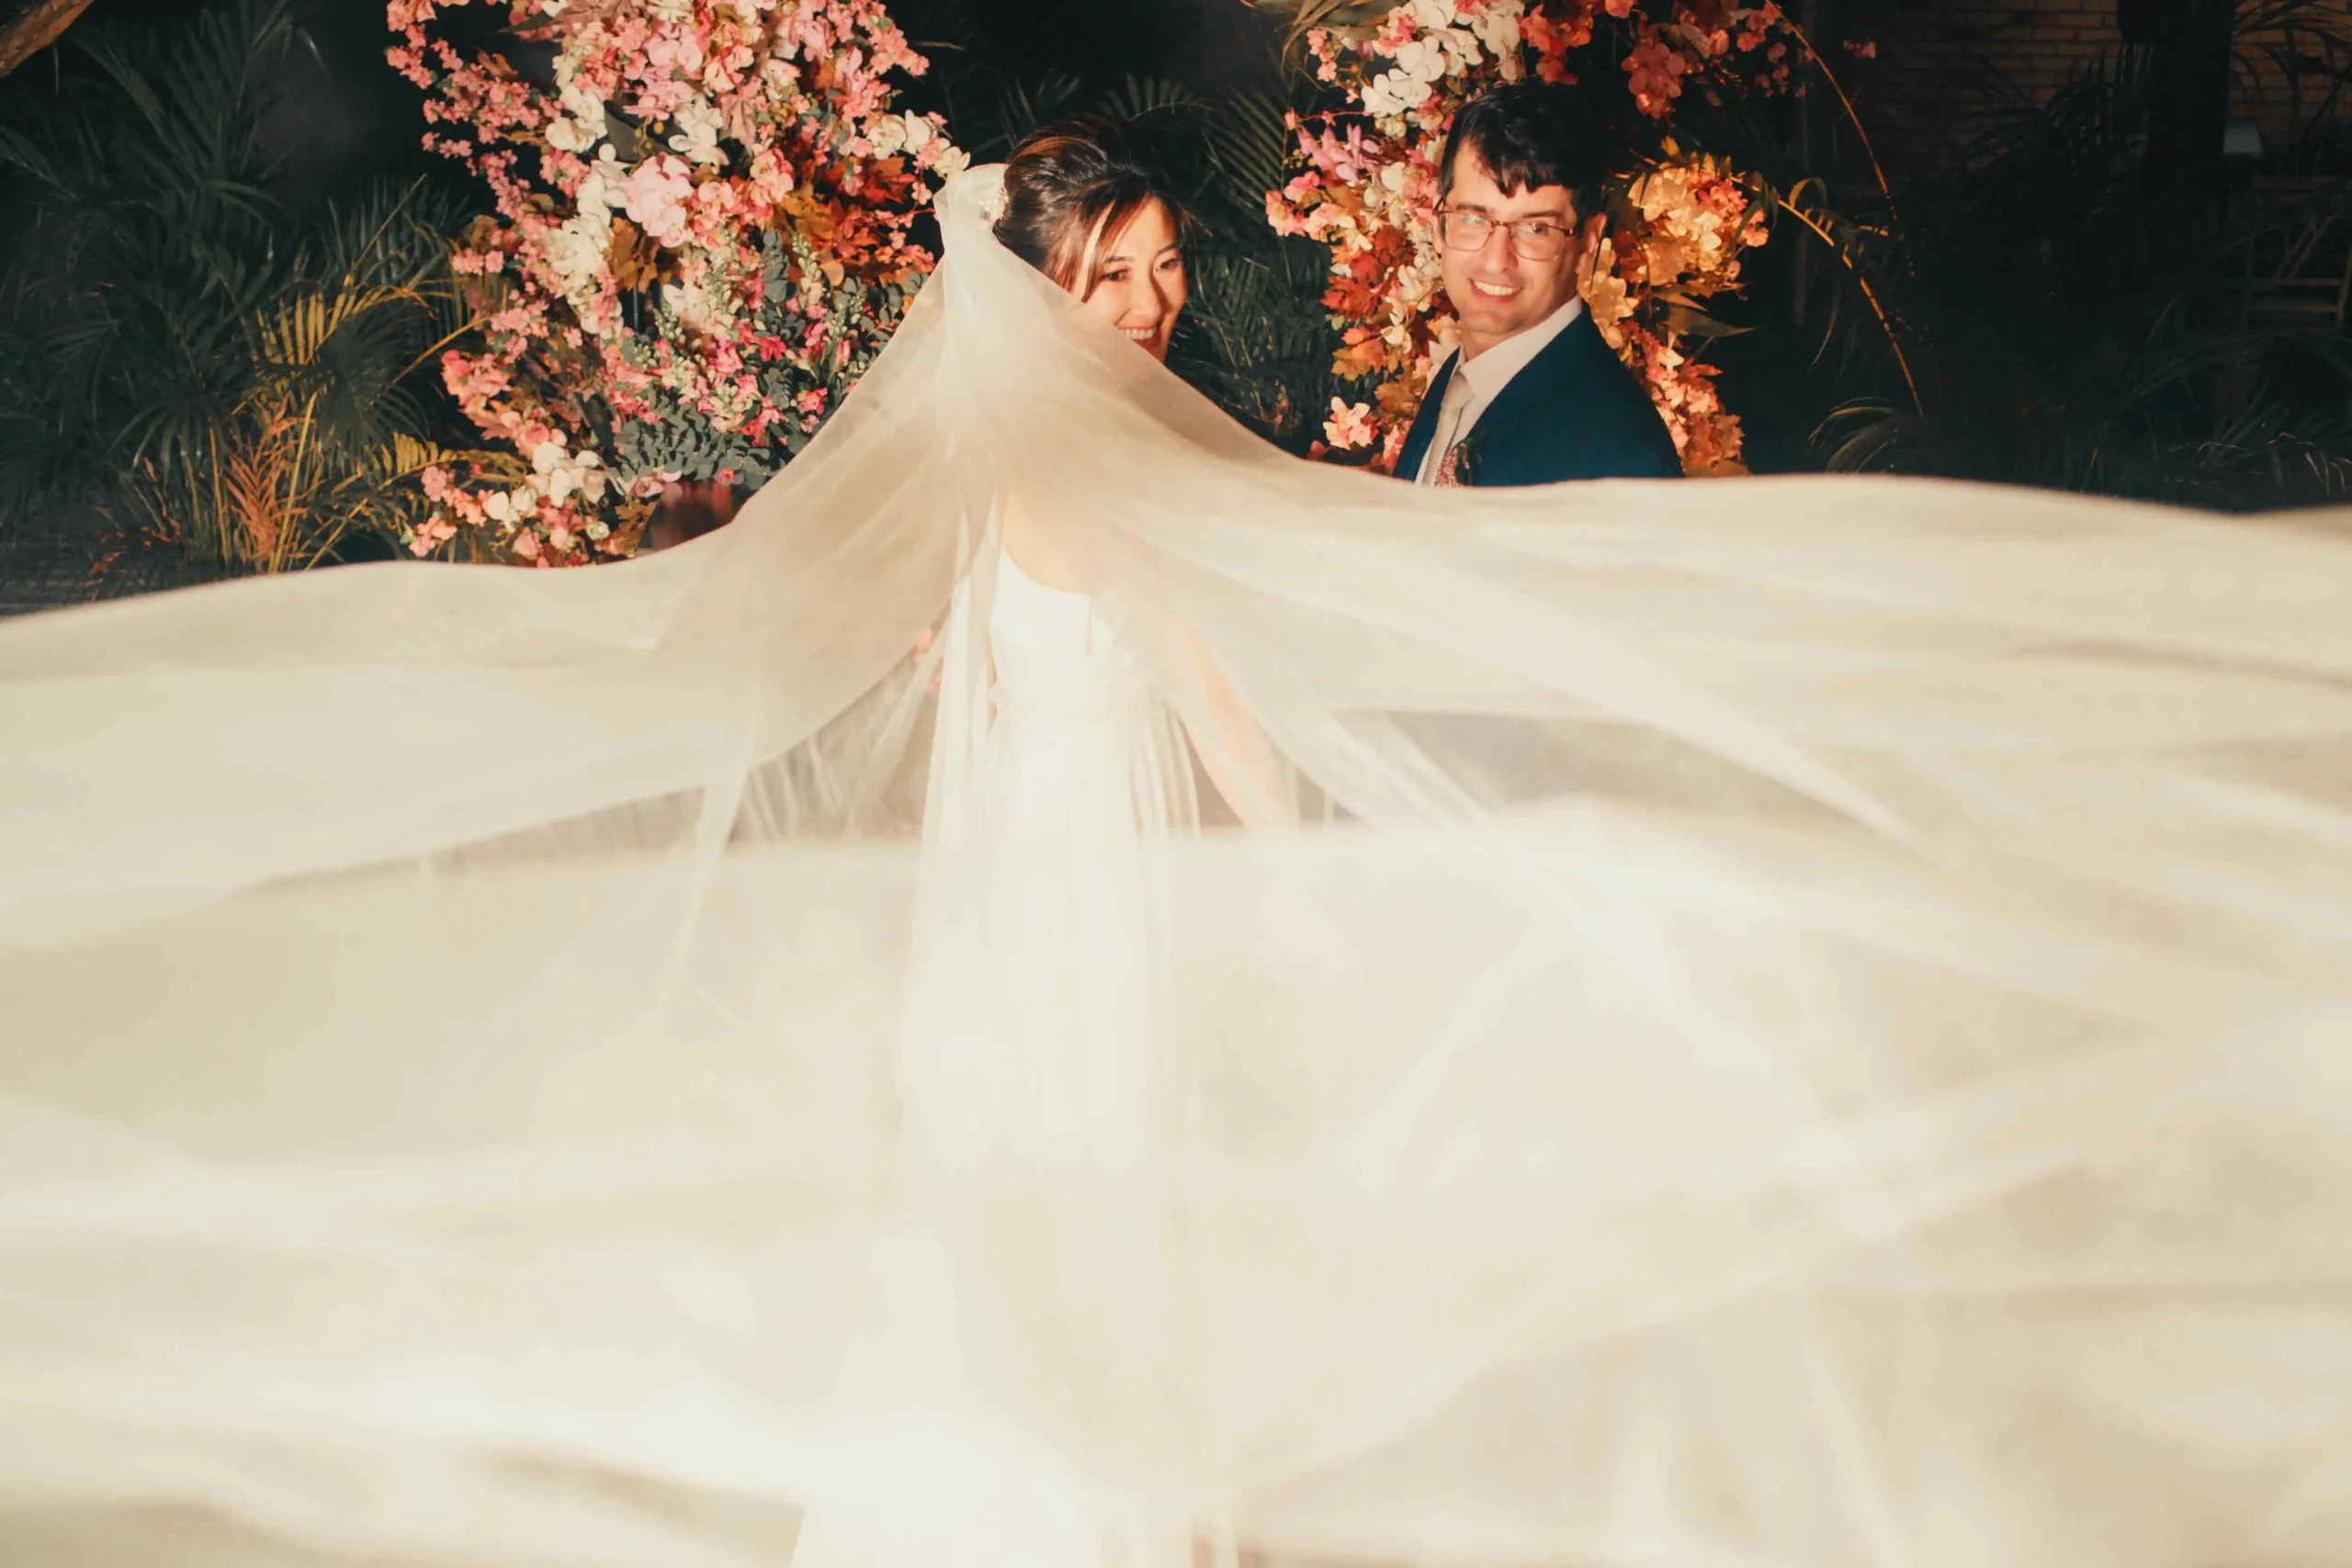 Bride and groom sharing a kiss in the garden surrounded by fall foliage on their wedding day<br />
